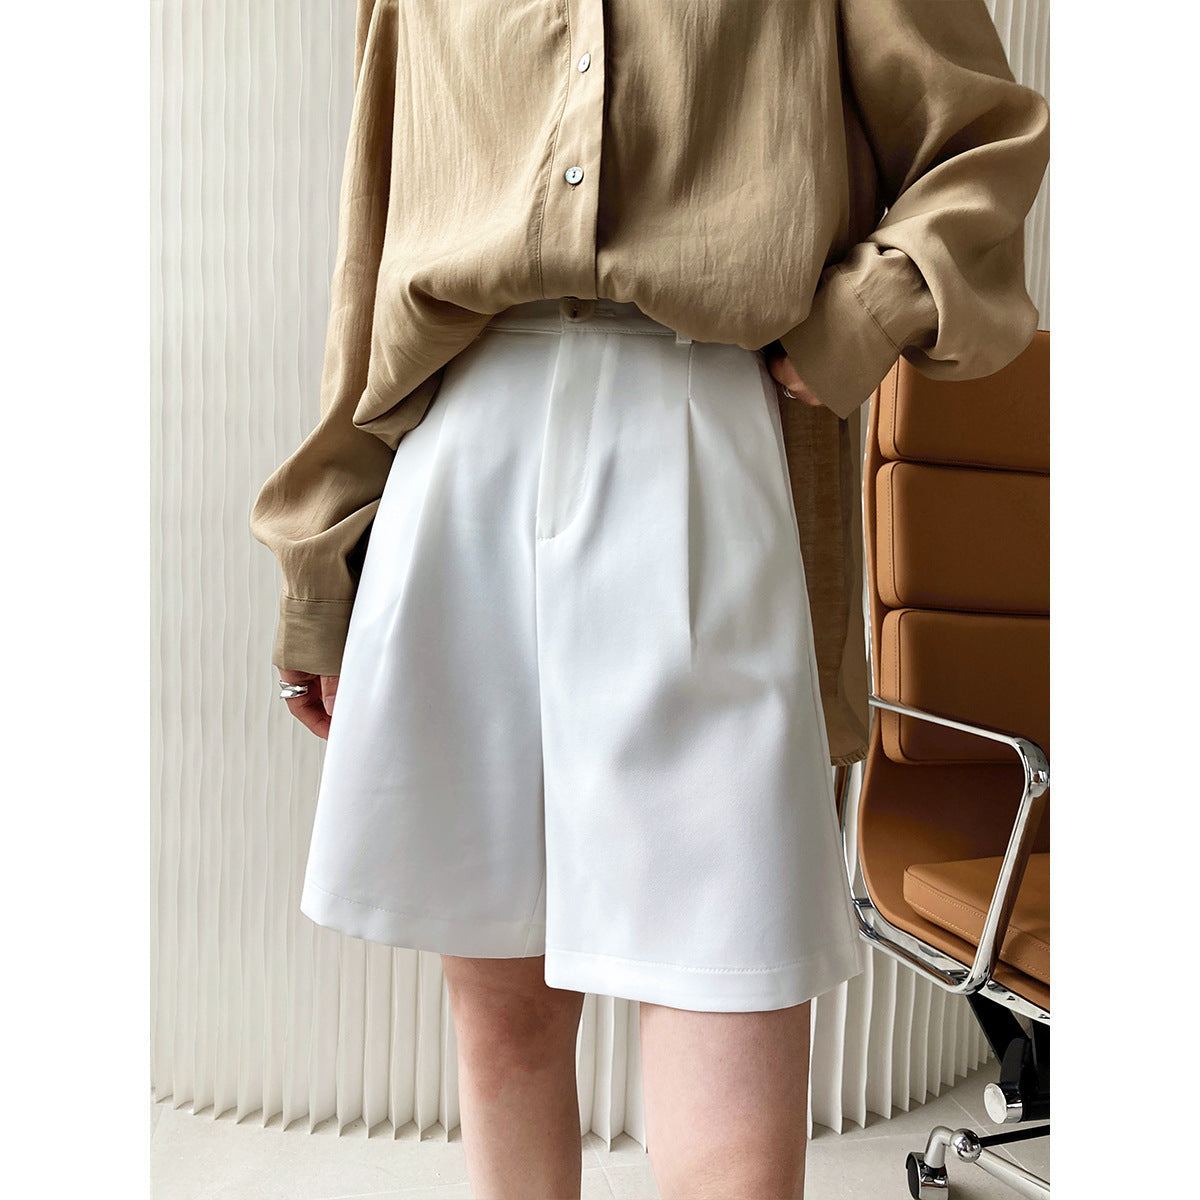 Deer Xi wide legs suit shorts female summer 2021 new high waist slim INS thin section casual five pants 1012 baby magazin 